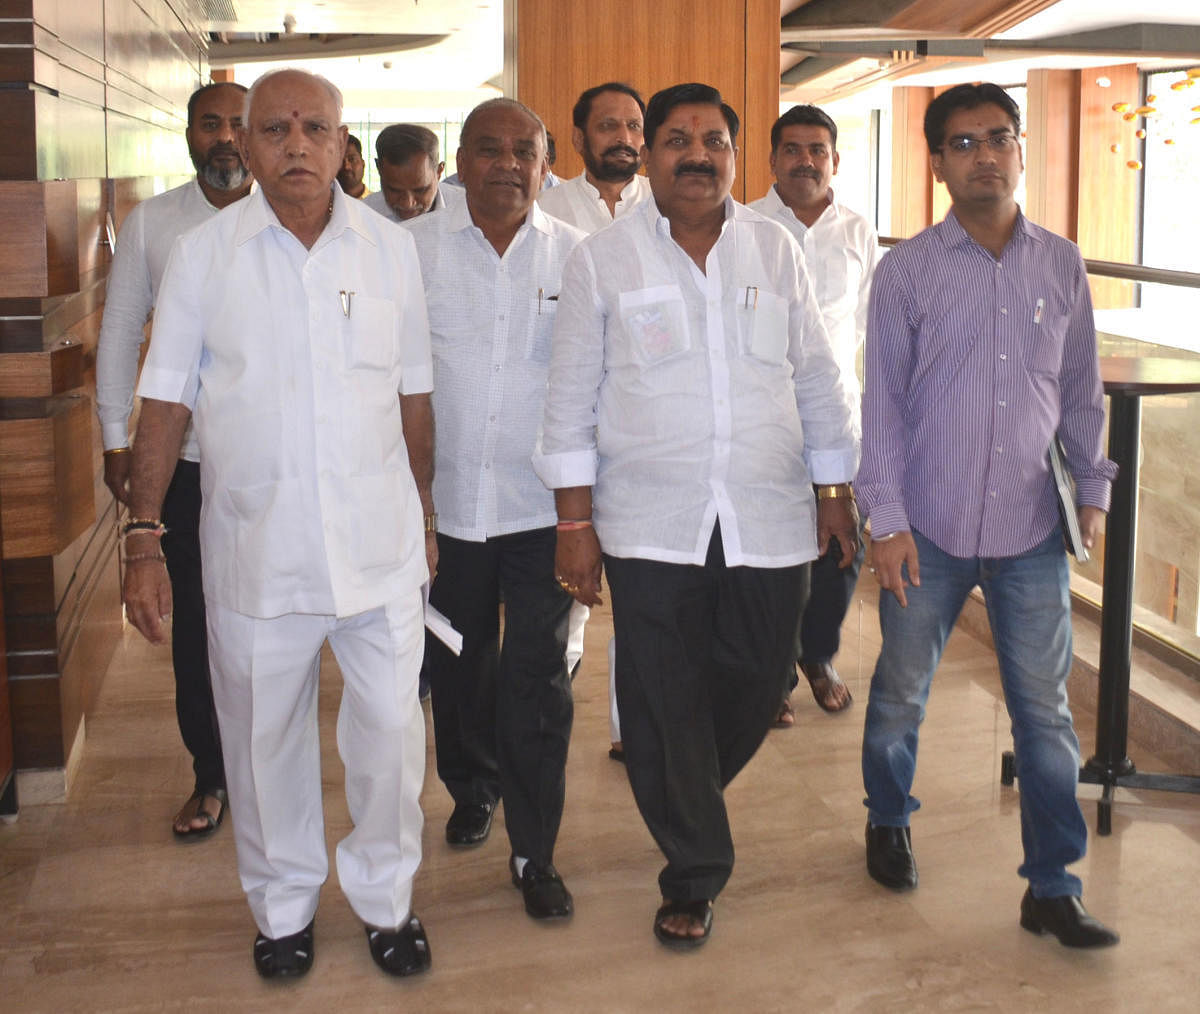 BJP state president B S Yeddyurappa comes out after a meeting with the Katti brothers in Belagavi on Monday. Umesh Katti, Chikkodi candidate Annasaheb Jolle and others are seen. dh photo